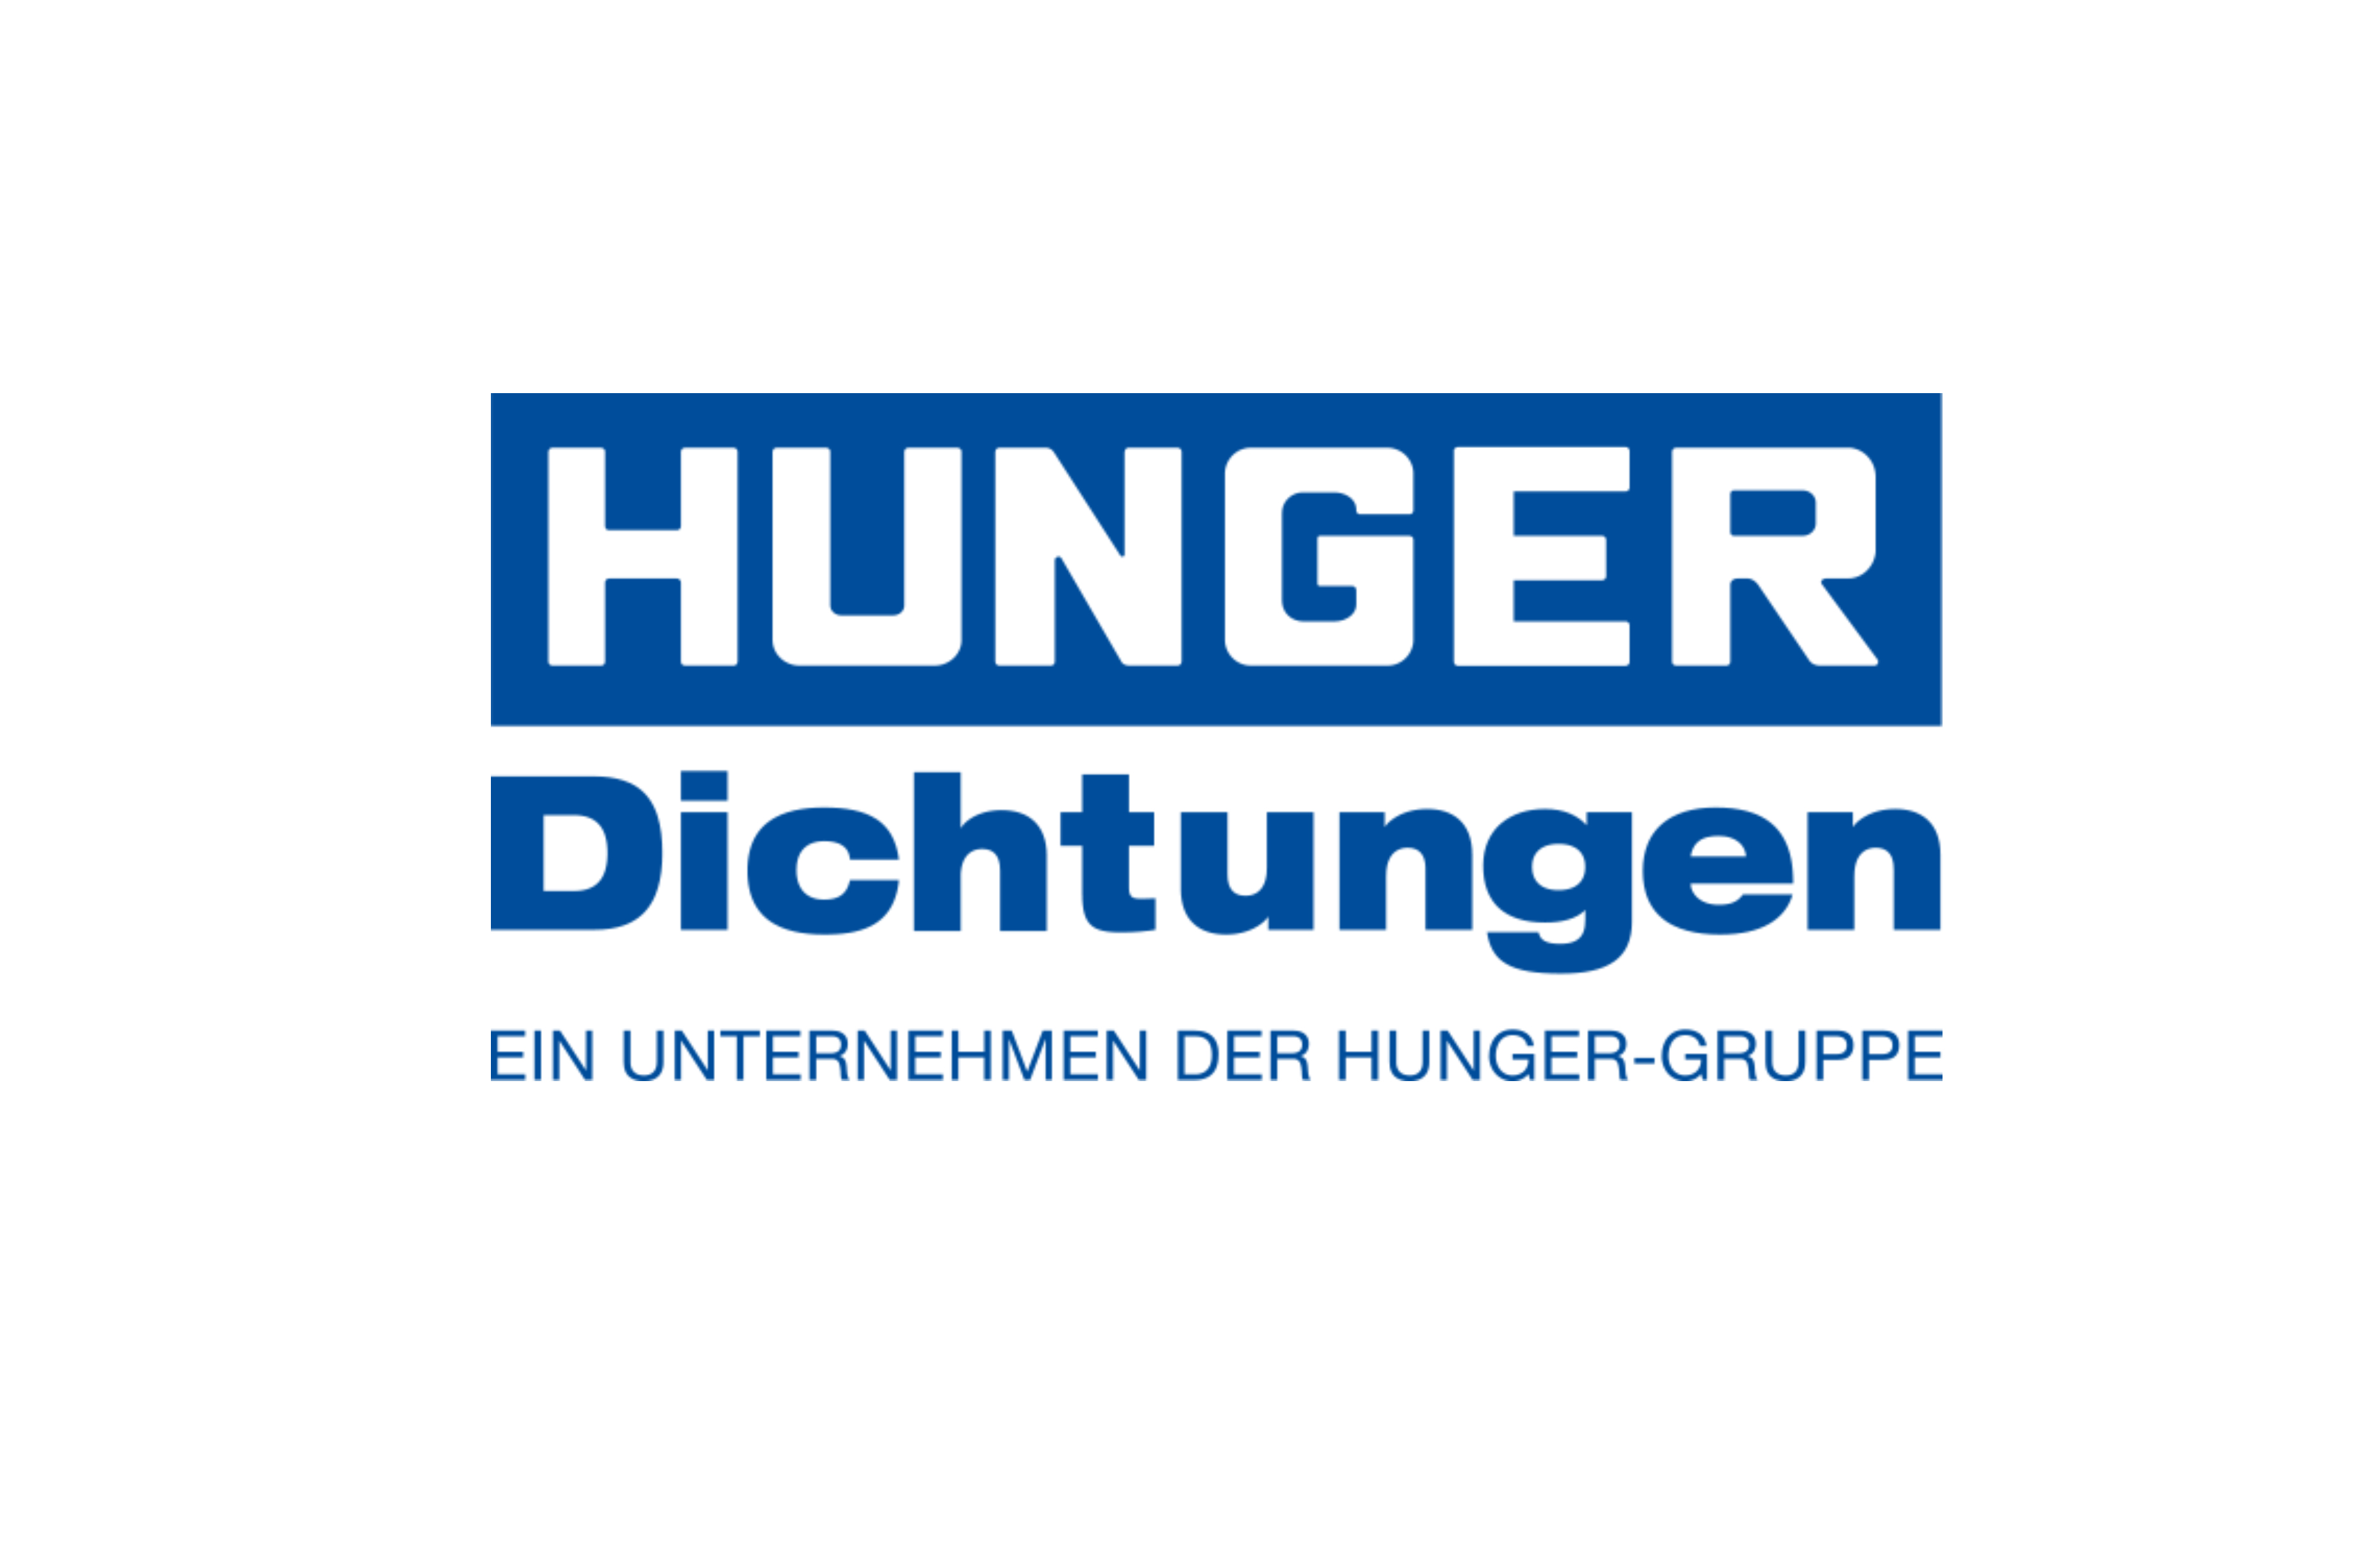 The brands HUNGER DFE